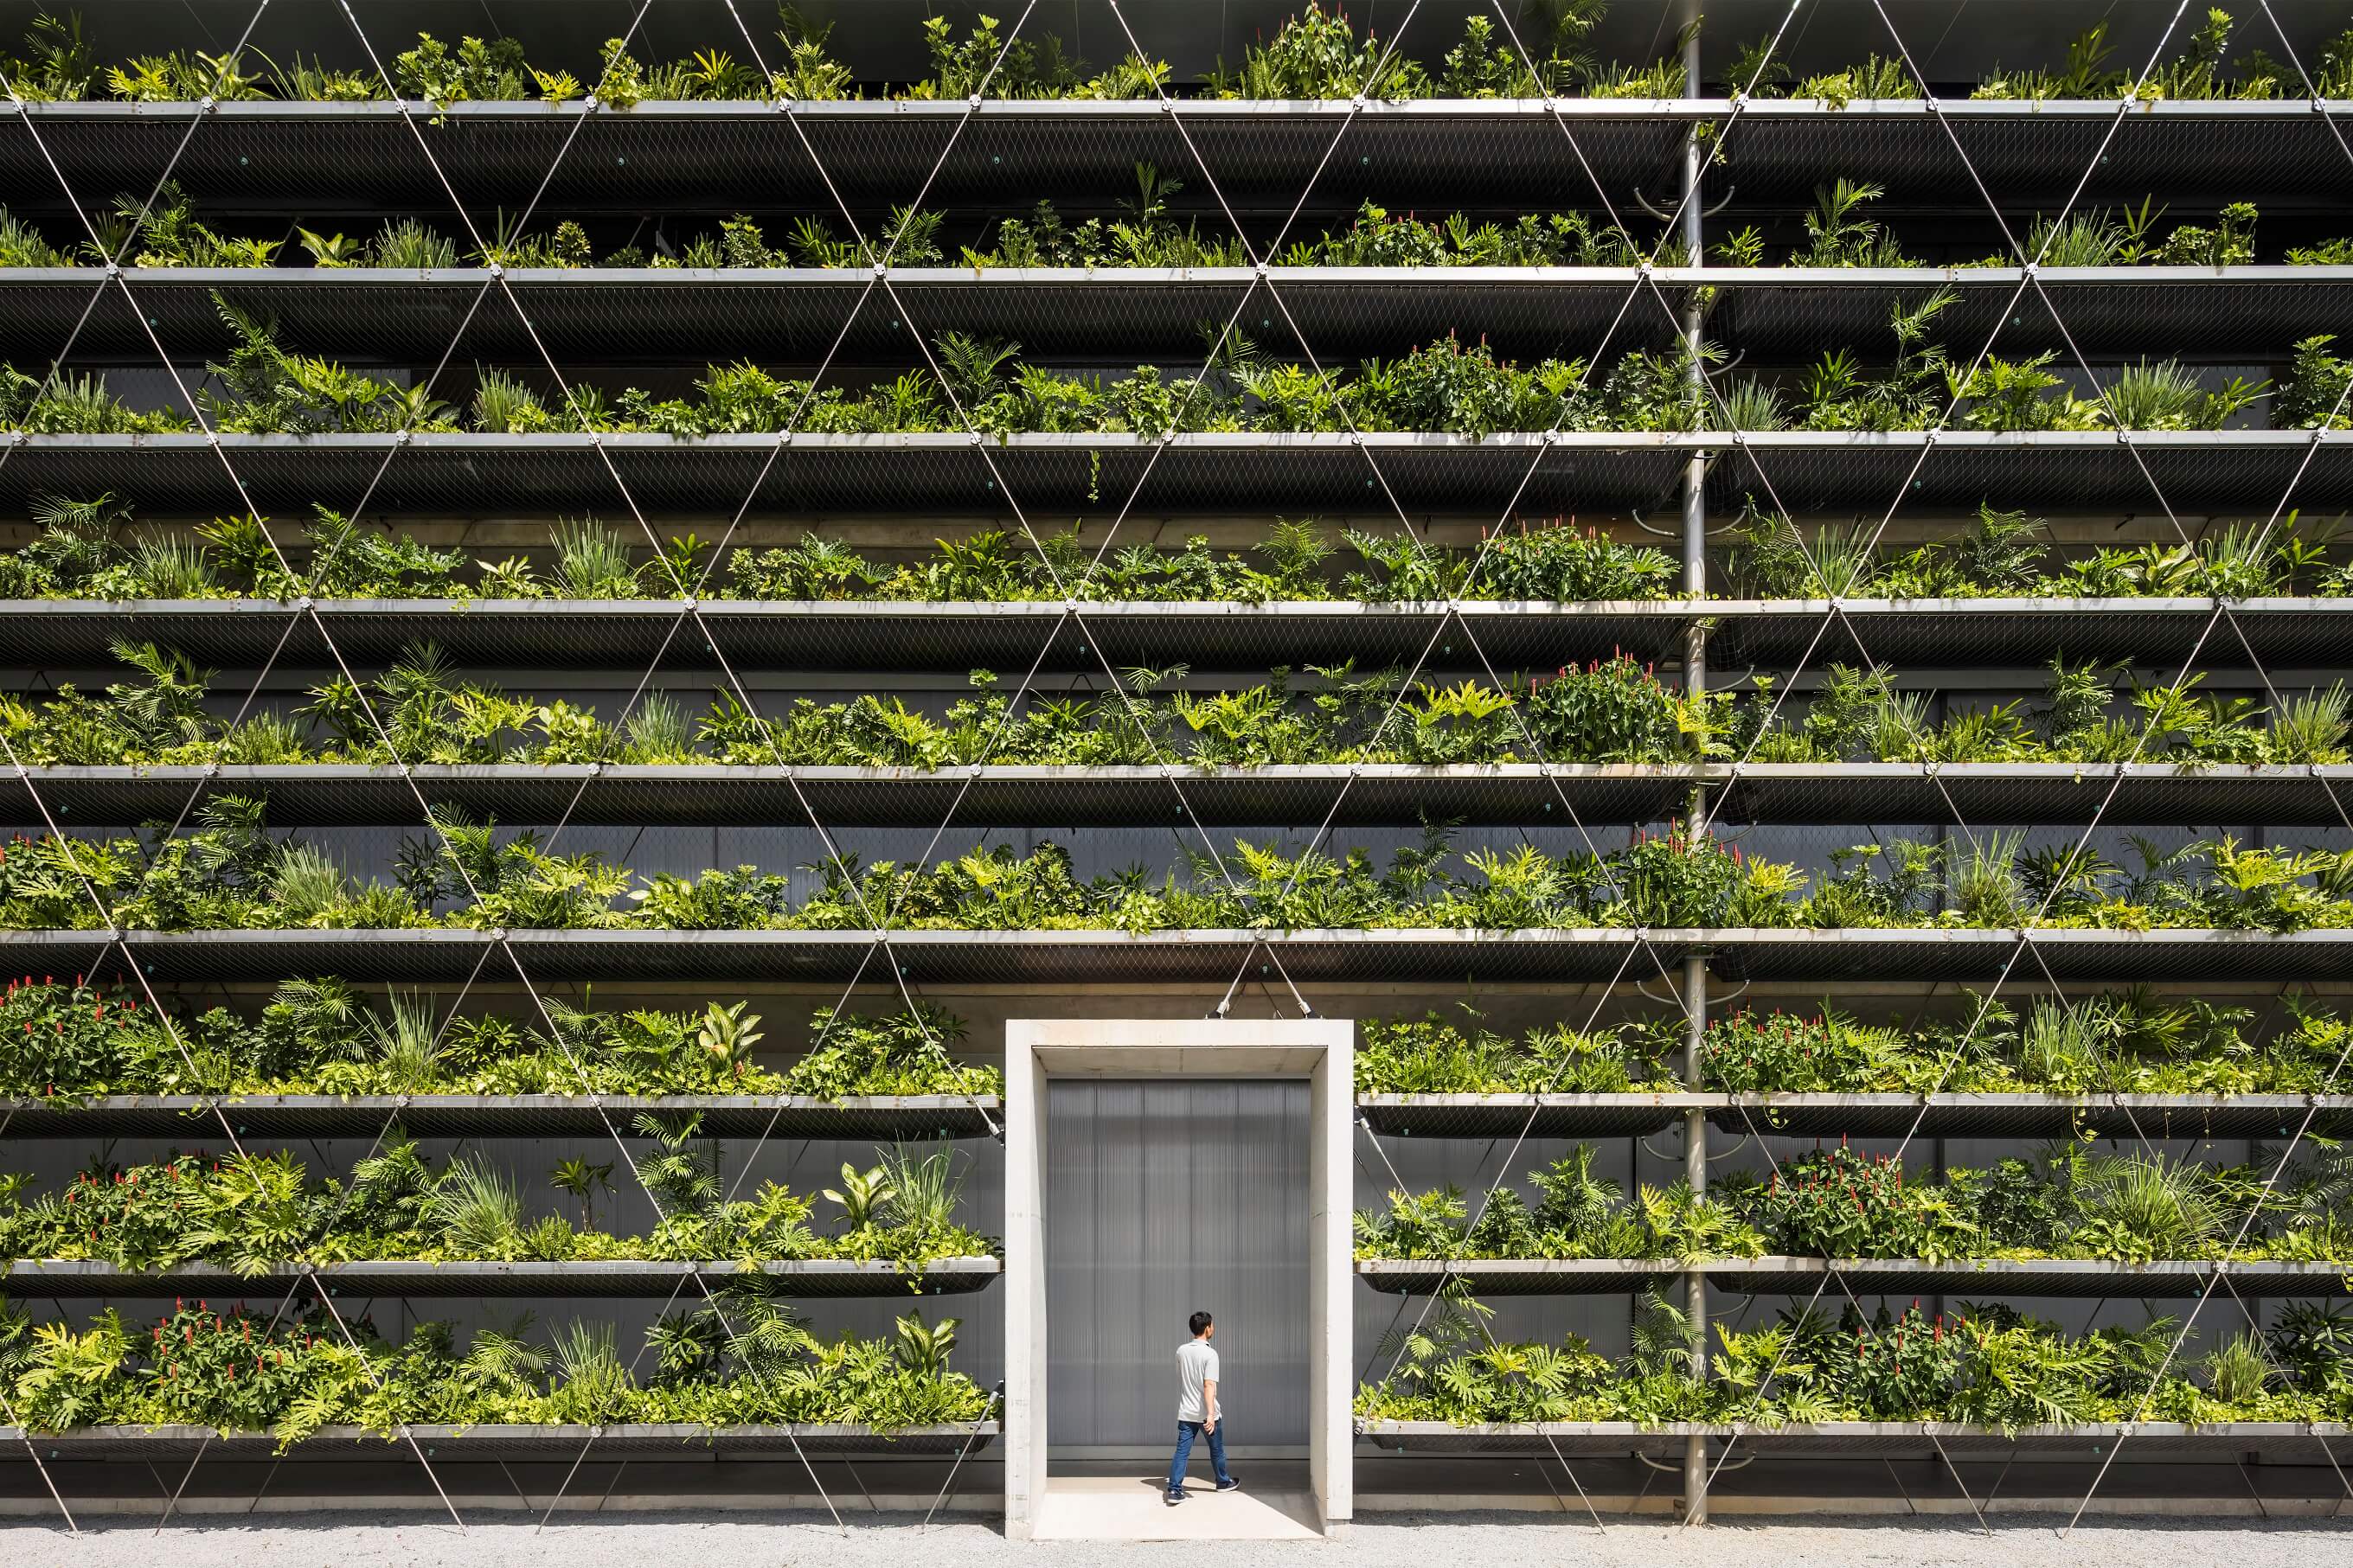 Green shoots: The future of urban rewilding and vertical farming